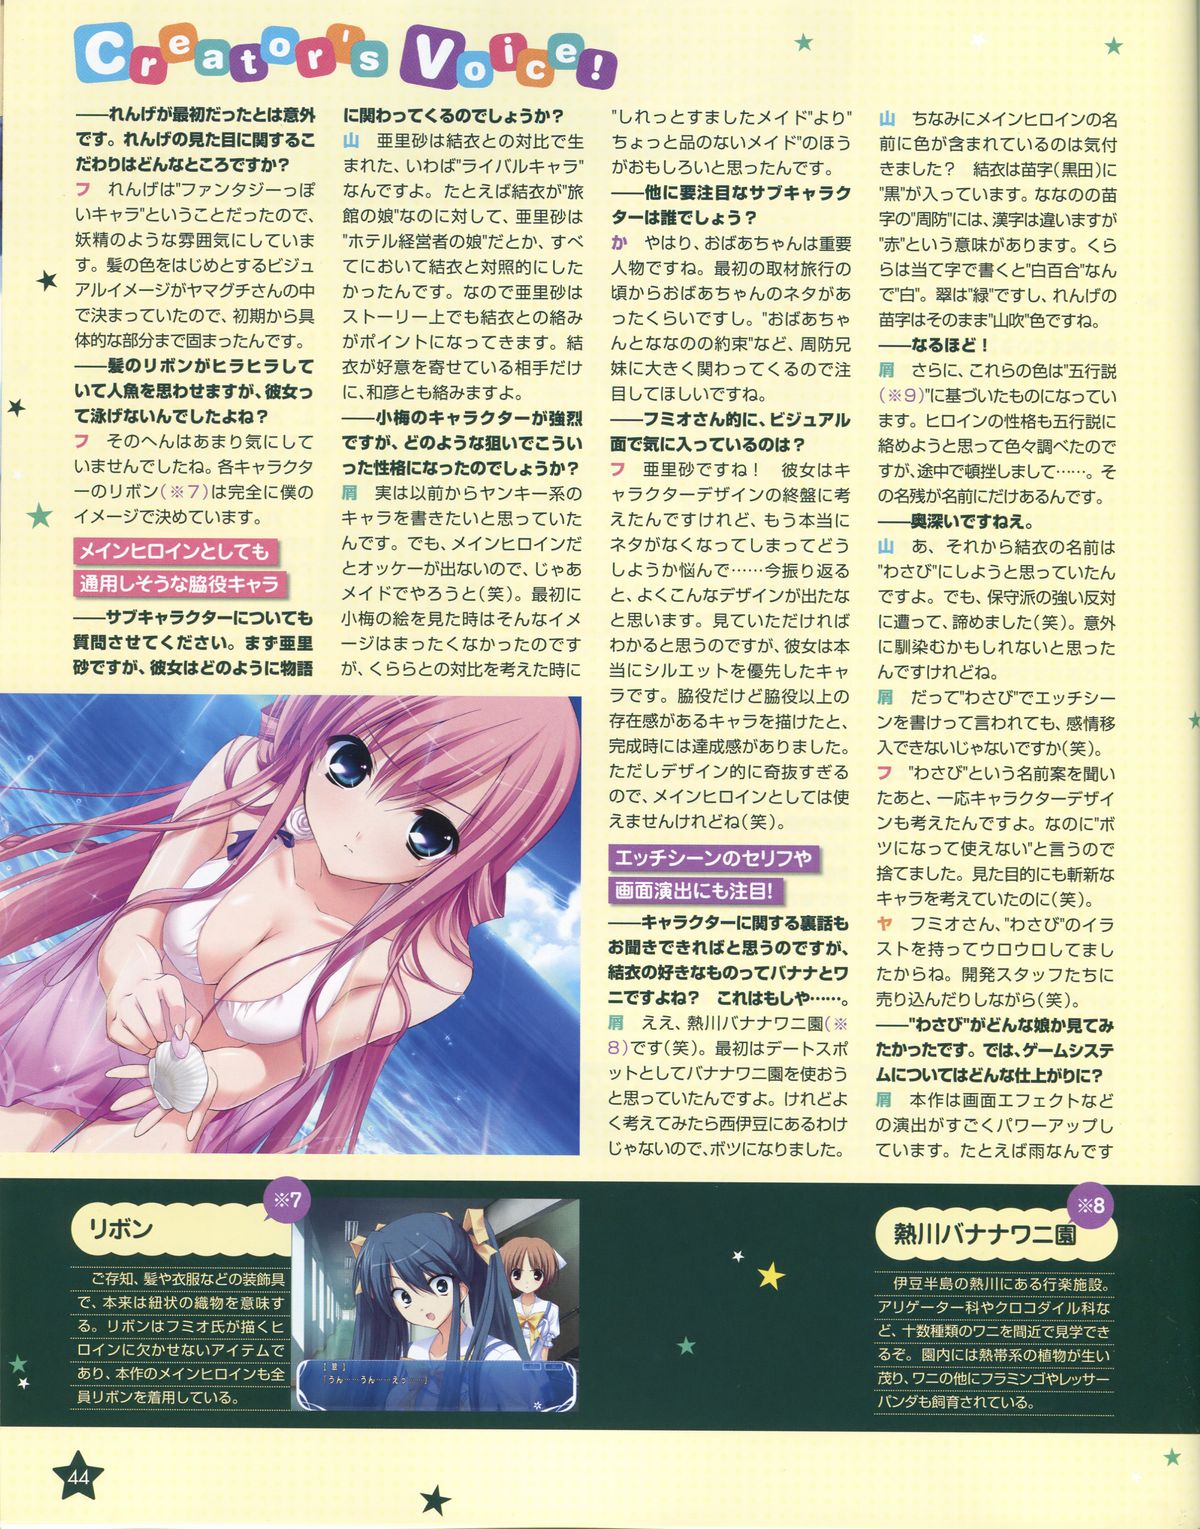 TECH GIAN Super Prelude hoshiuta with DVD-Rom page 45 full